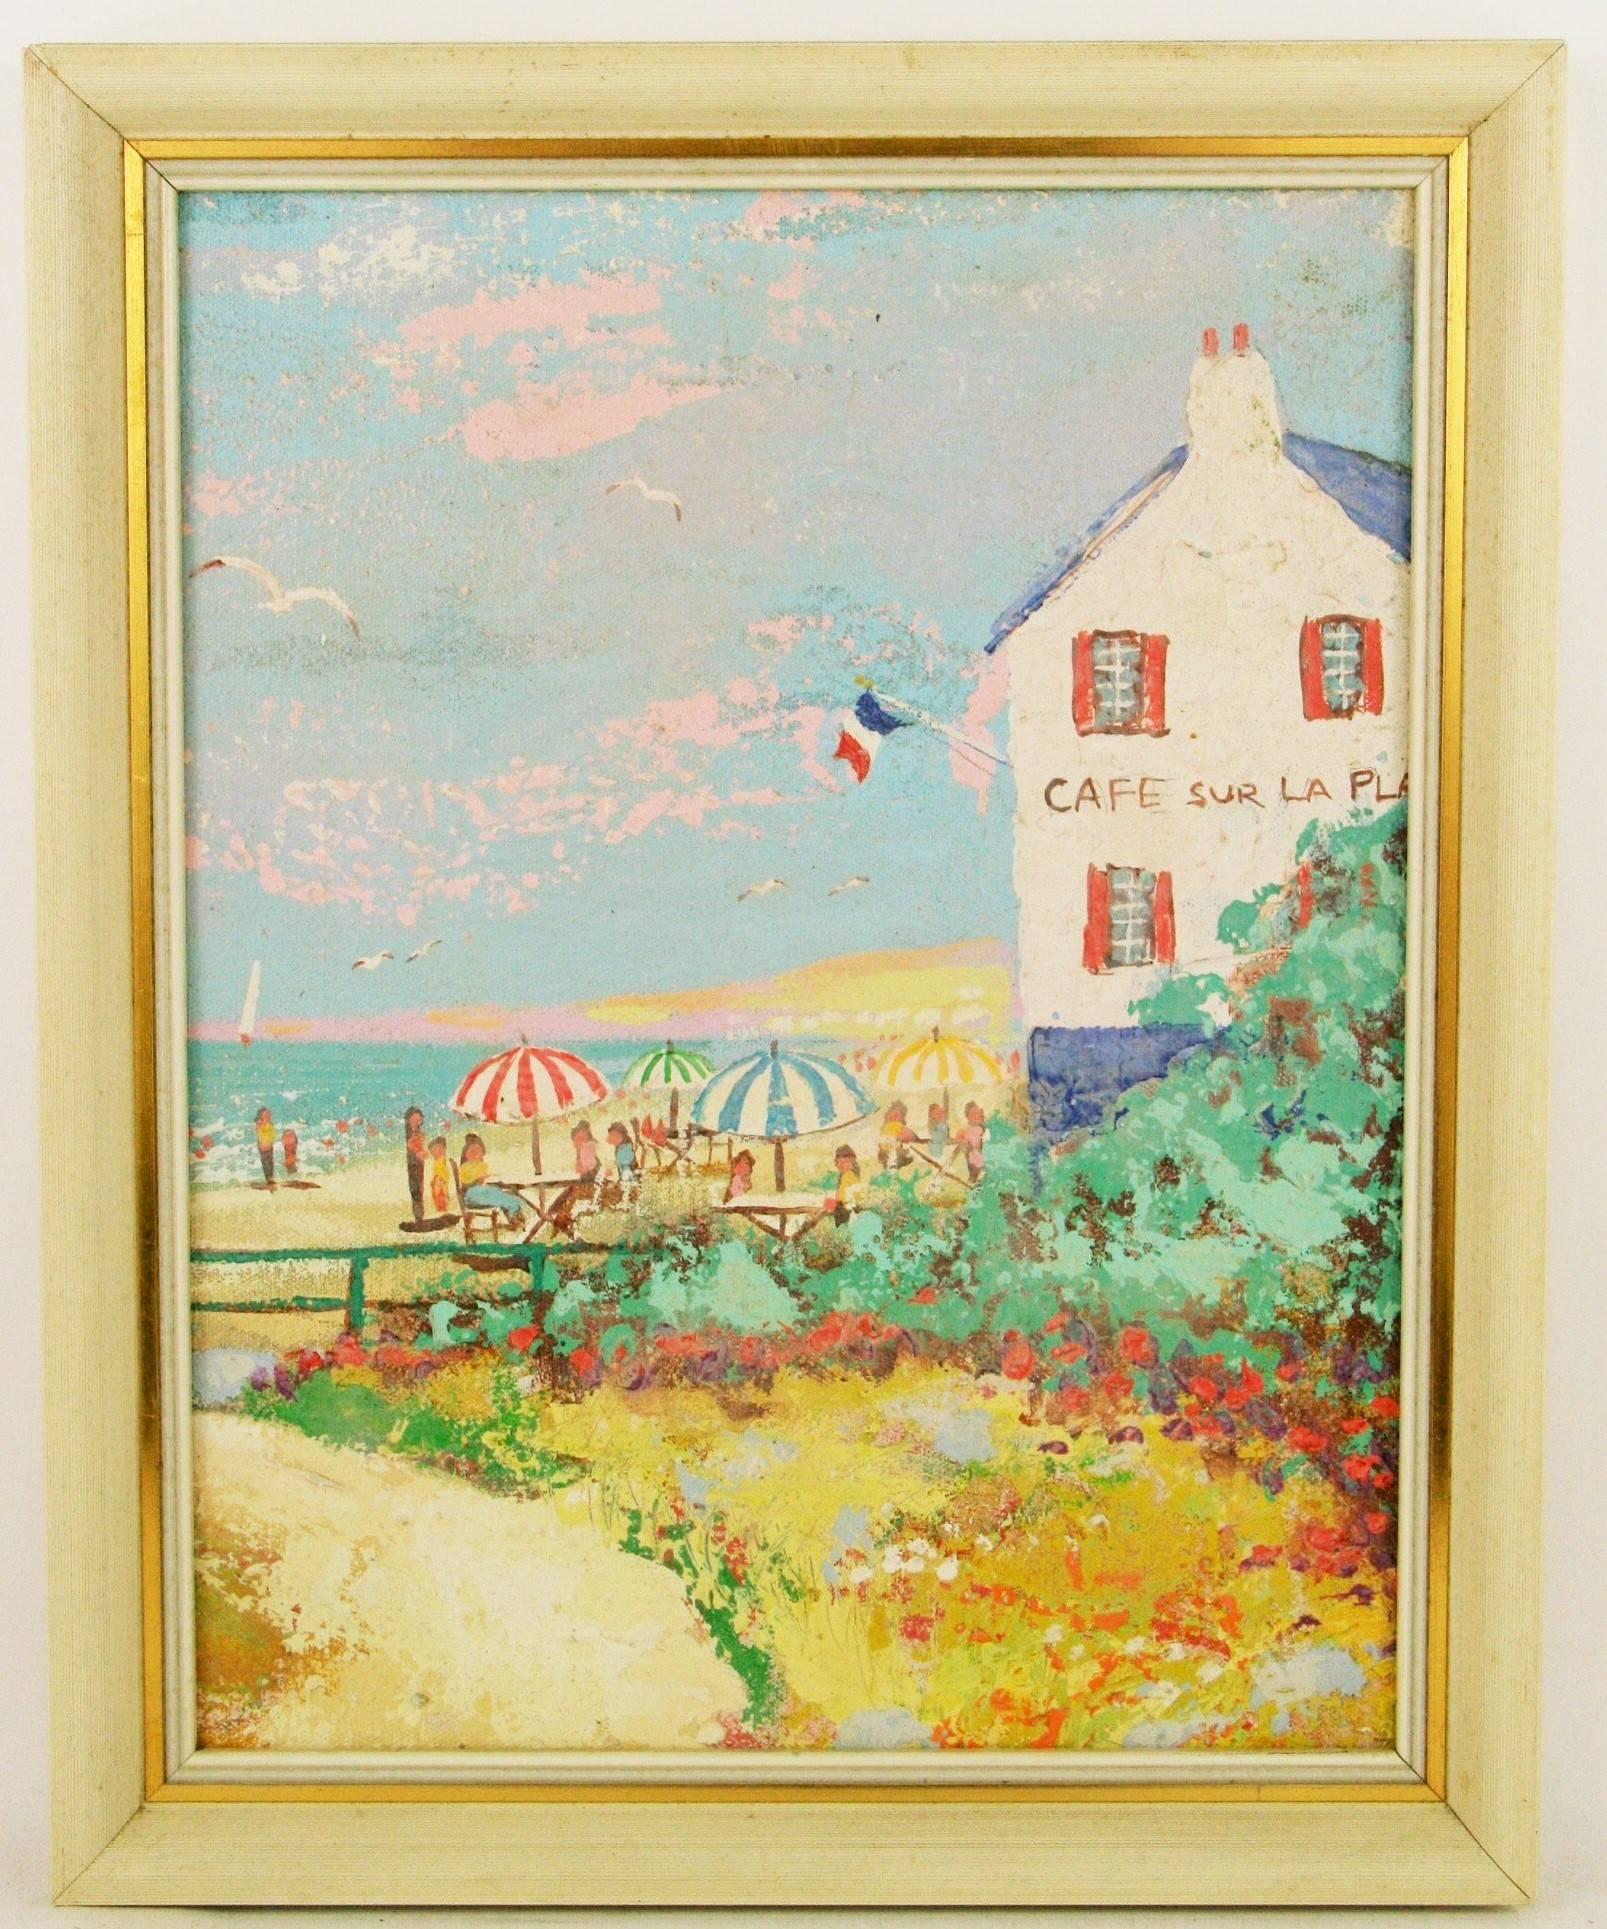  French Riviera Cafe Sur lePlage Landscape  Painting  - Beige Still-Life Painting by Unknown